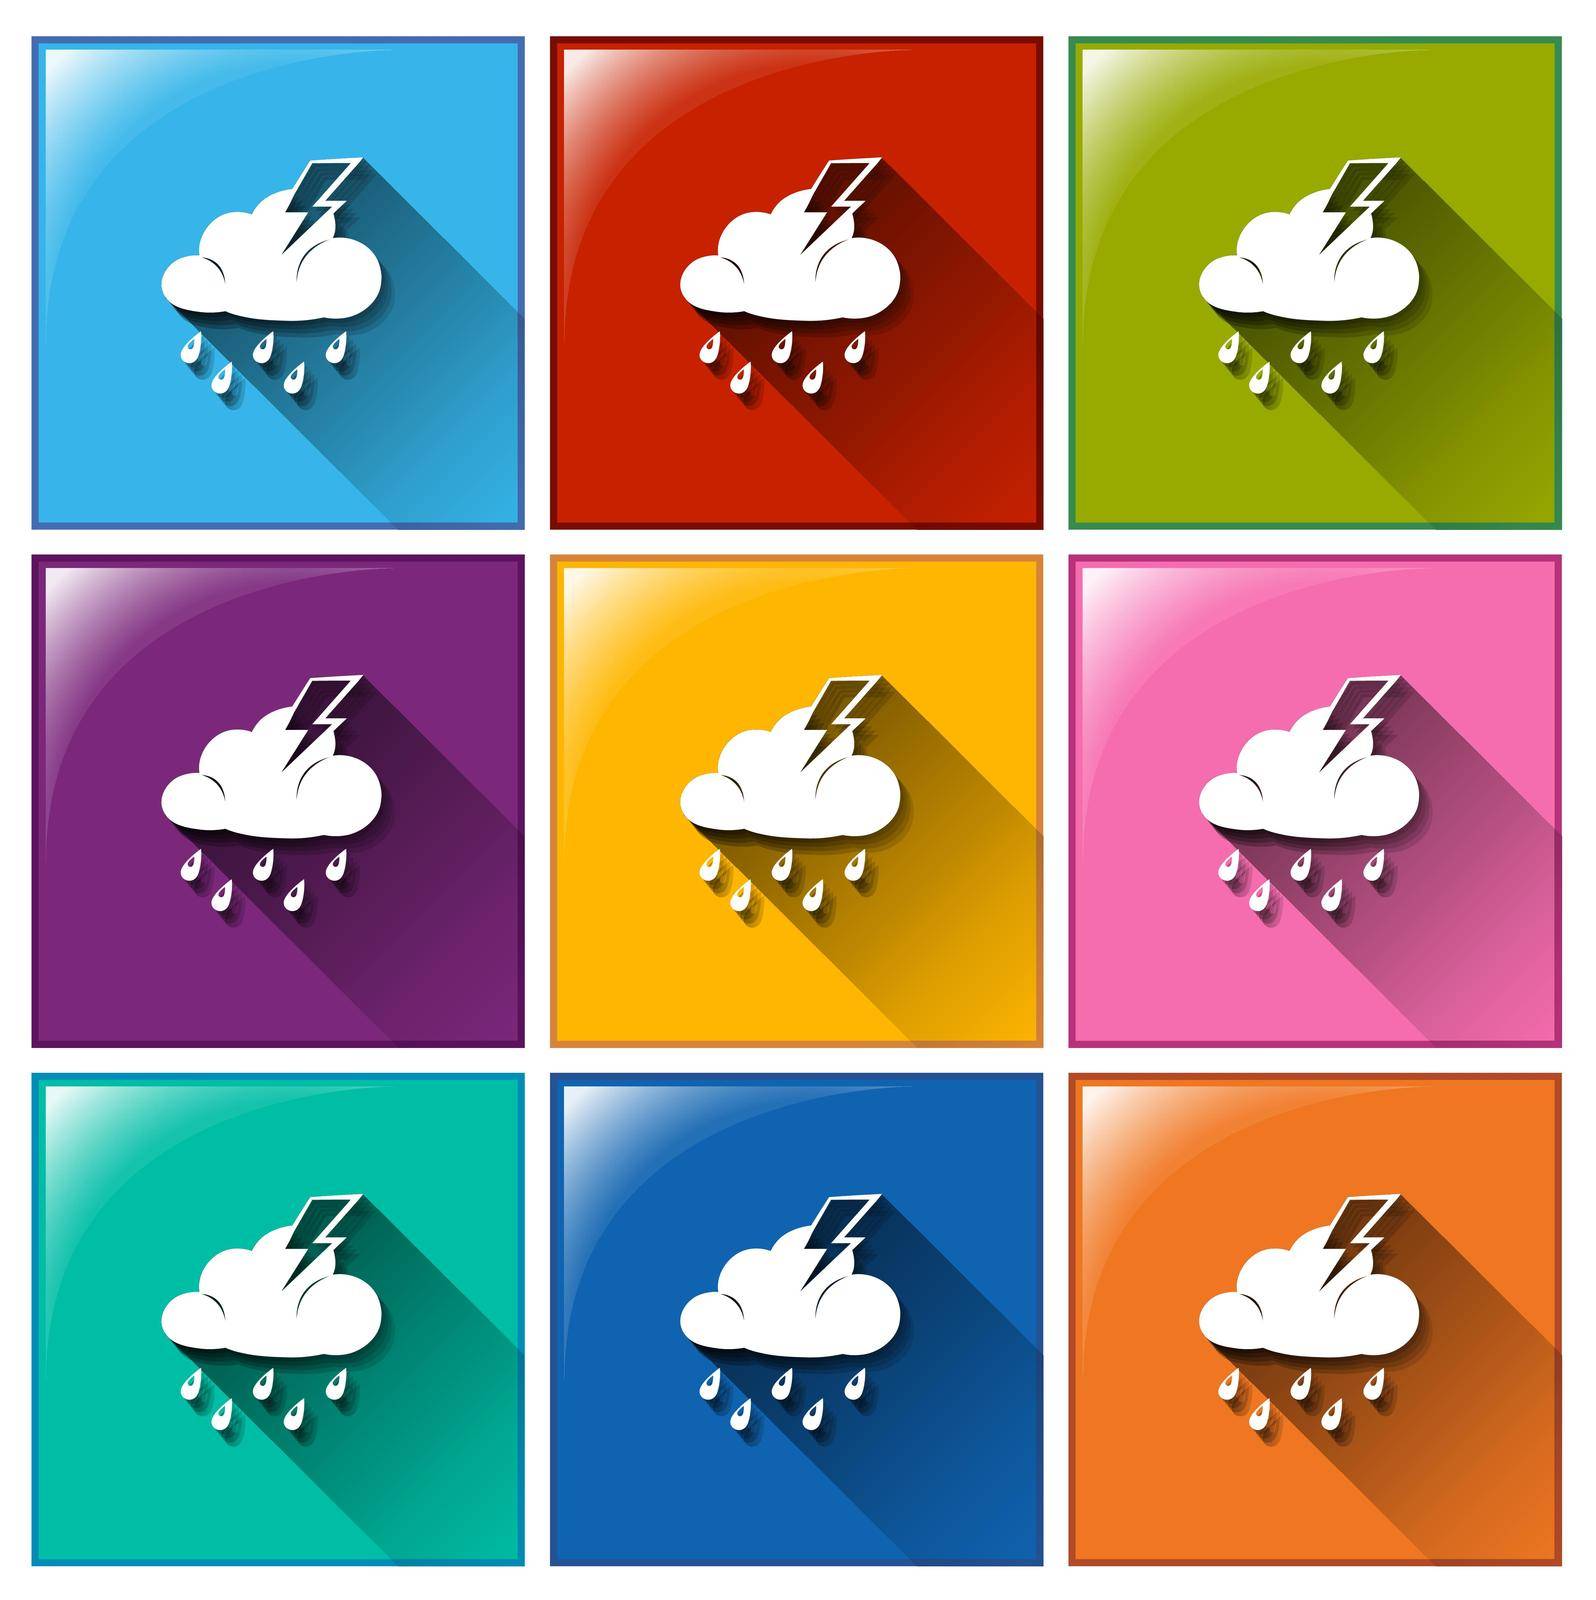 Illustration of the weather forecast icons on a white background